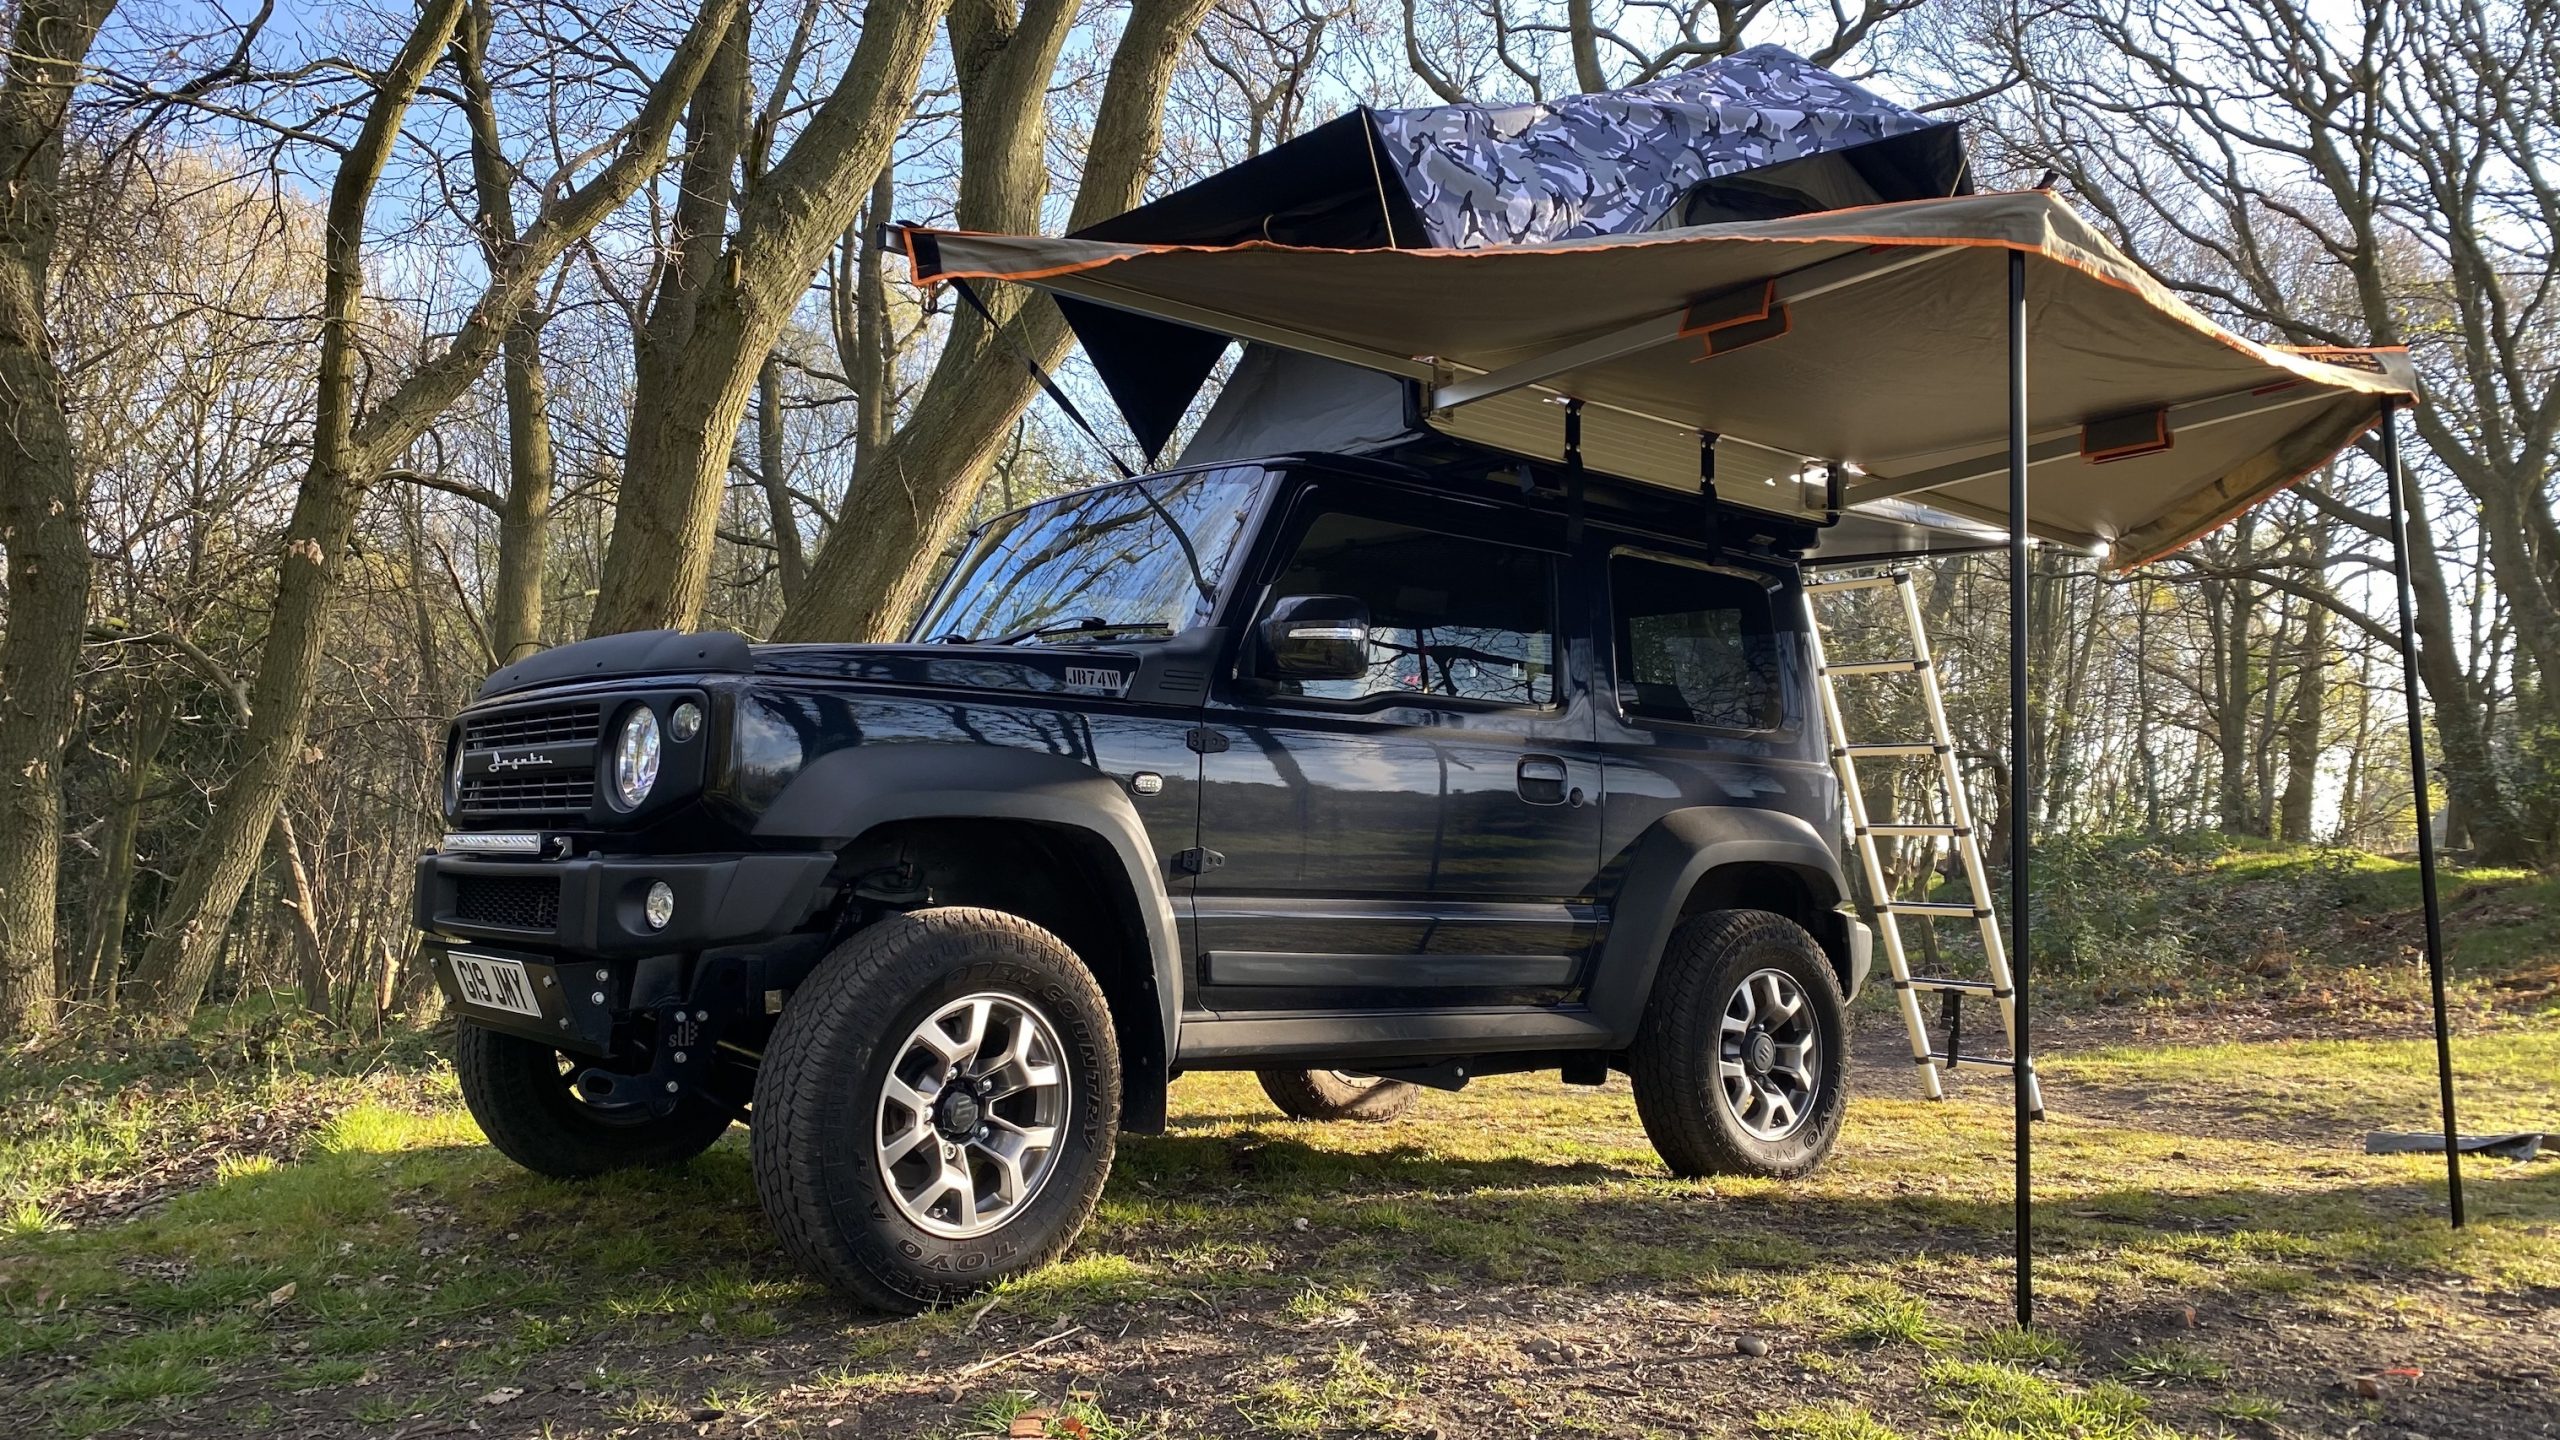 DARCHE 180 Rear Awning